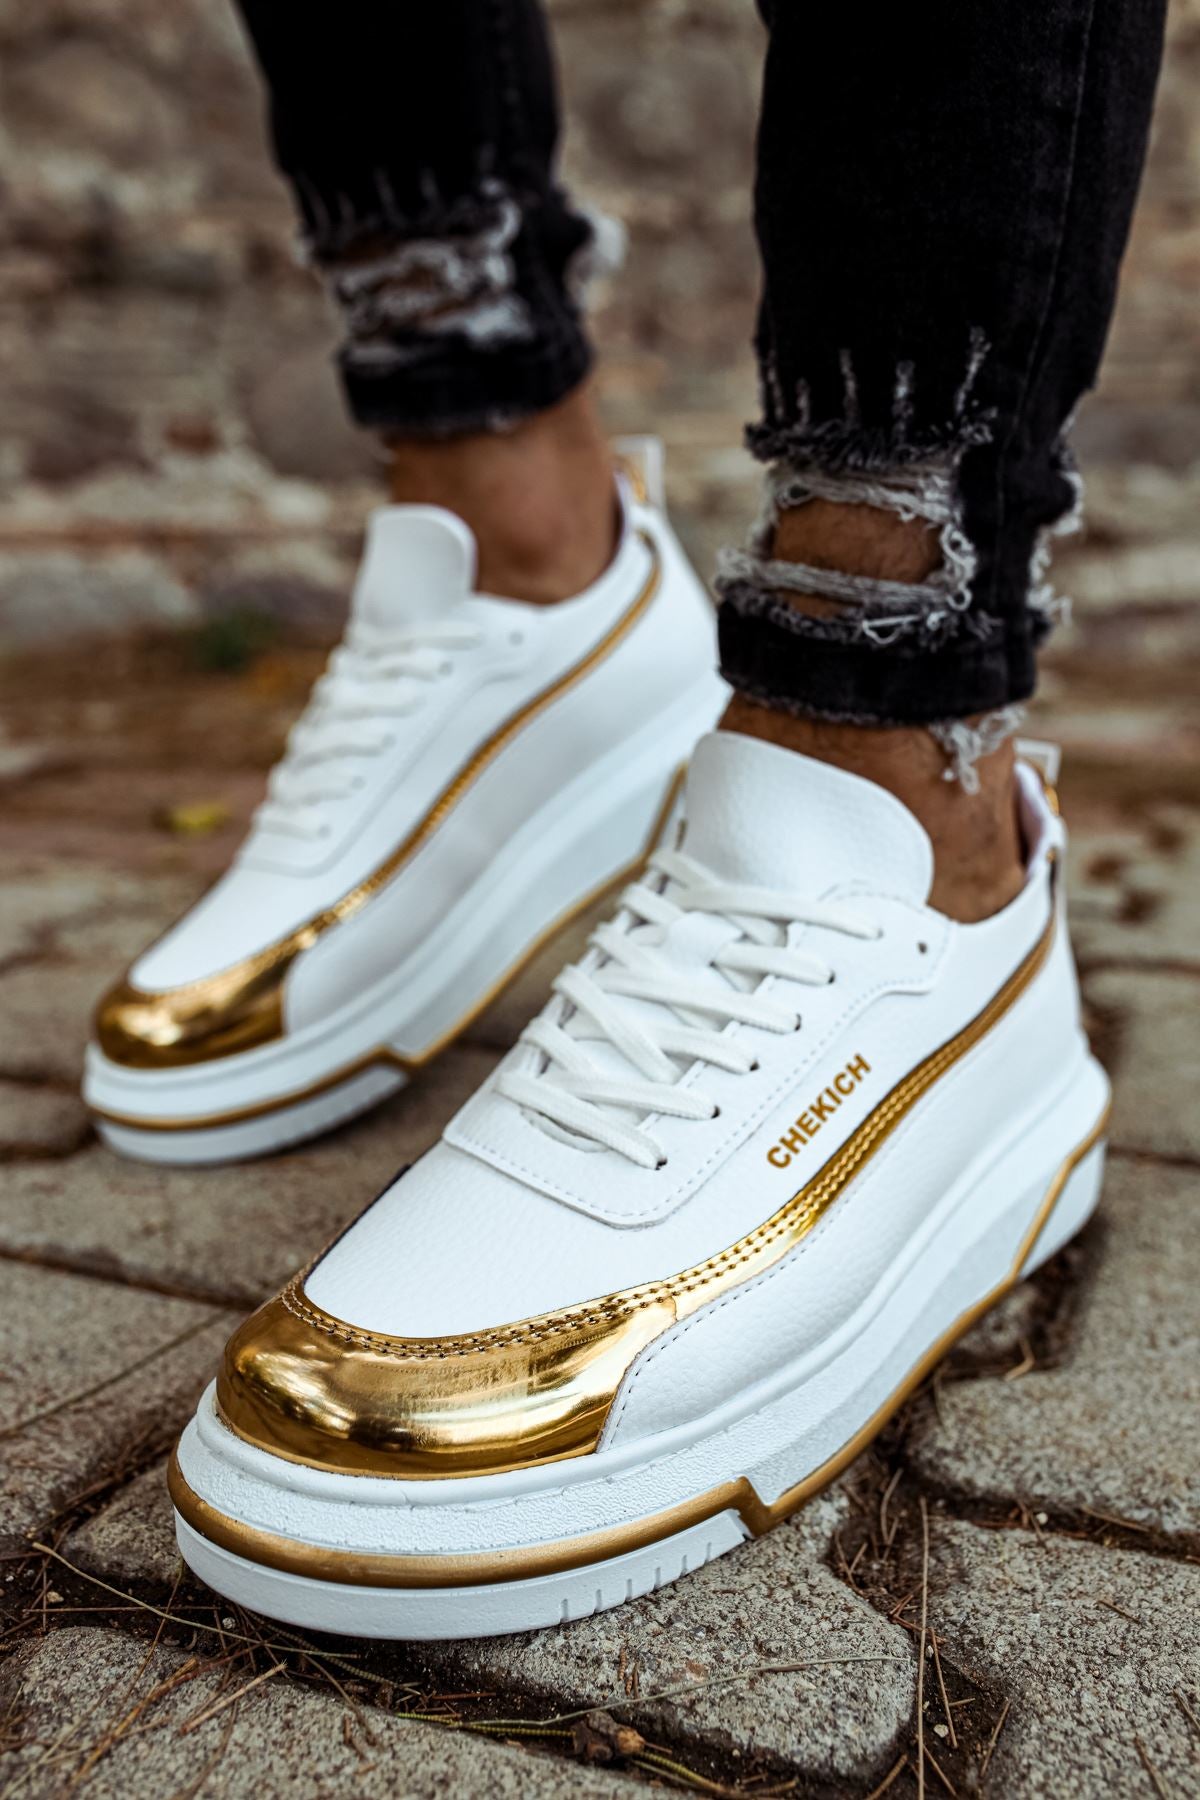 CH041 WS Men's Sneaker Shoes WHITE / GOLD - STREETMODE ™